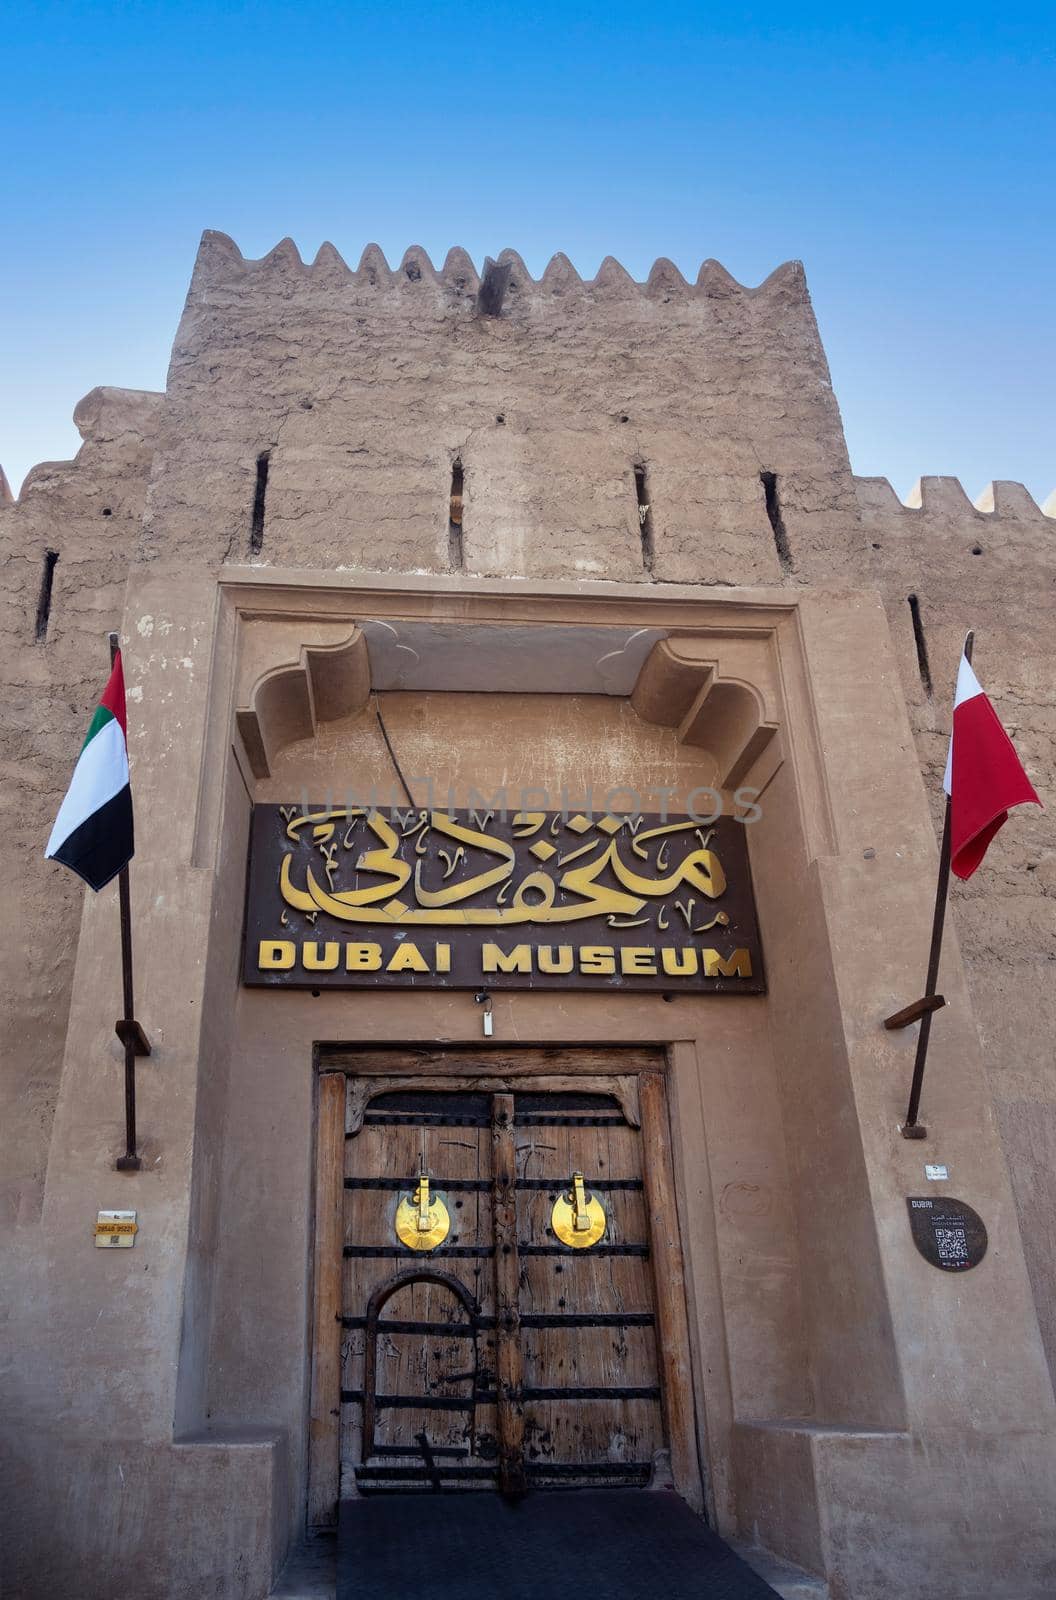 Feb 27th, 2021, Bur Dubai, UAE. View of the old Vintage door and signboard at the entrance to the museum of Dubai UAE captured at Bur Dubai, UAE. by sriyapixels